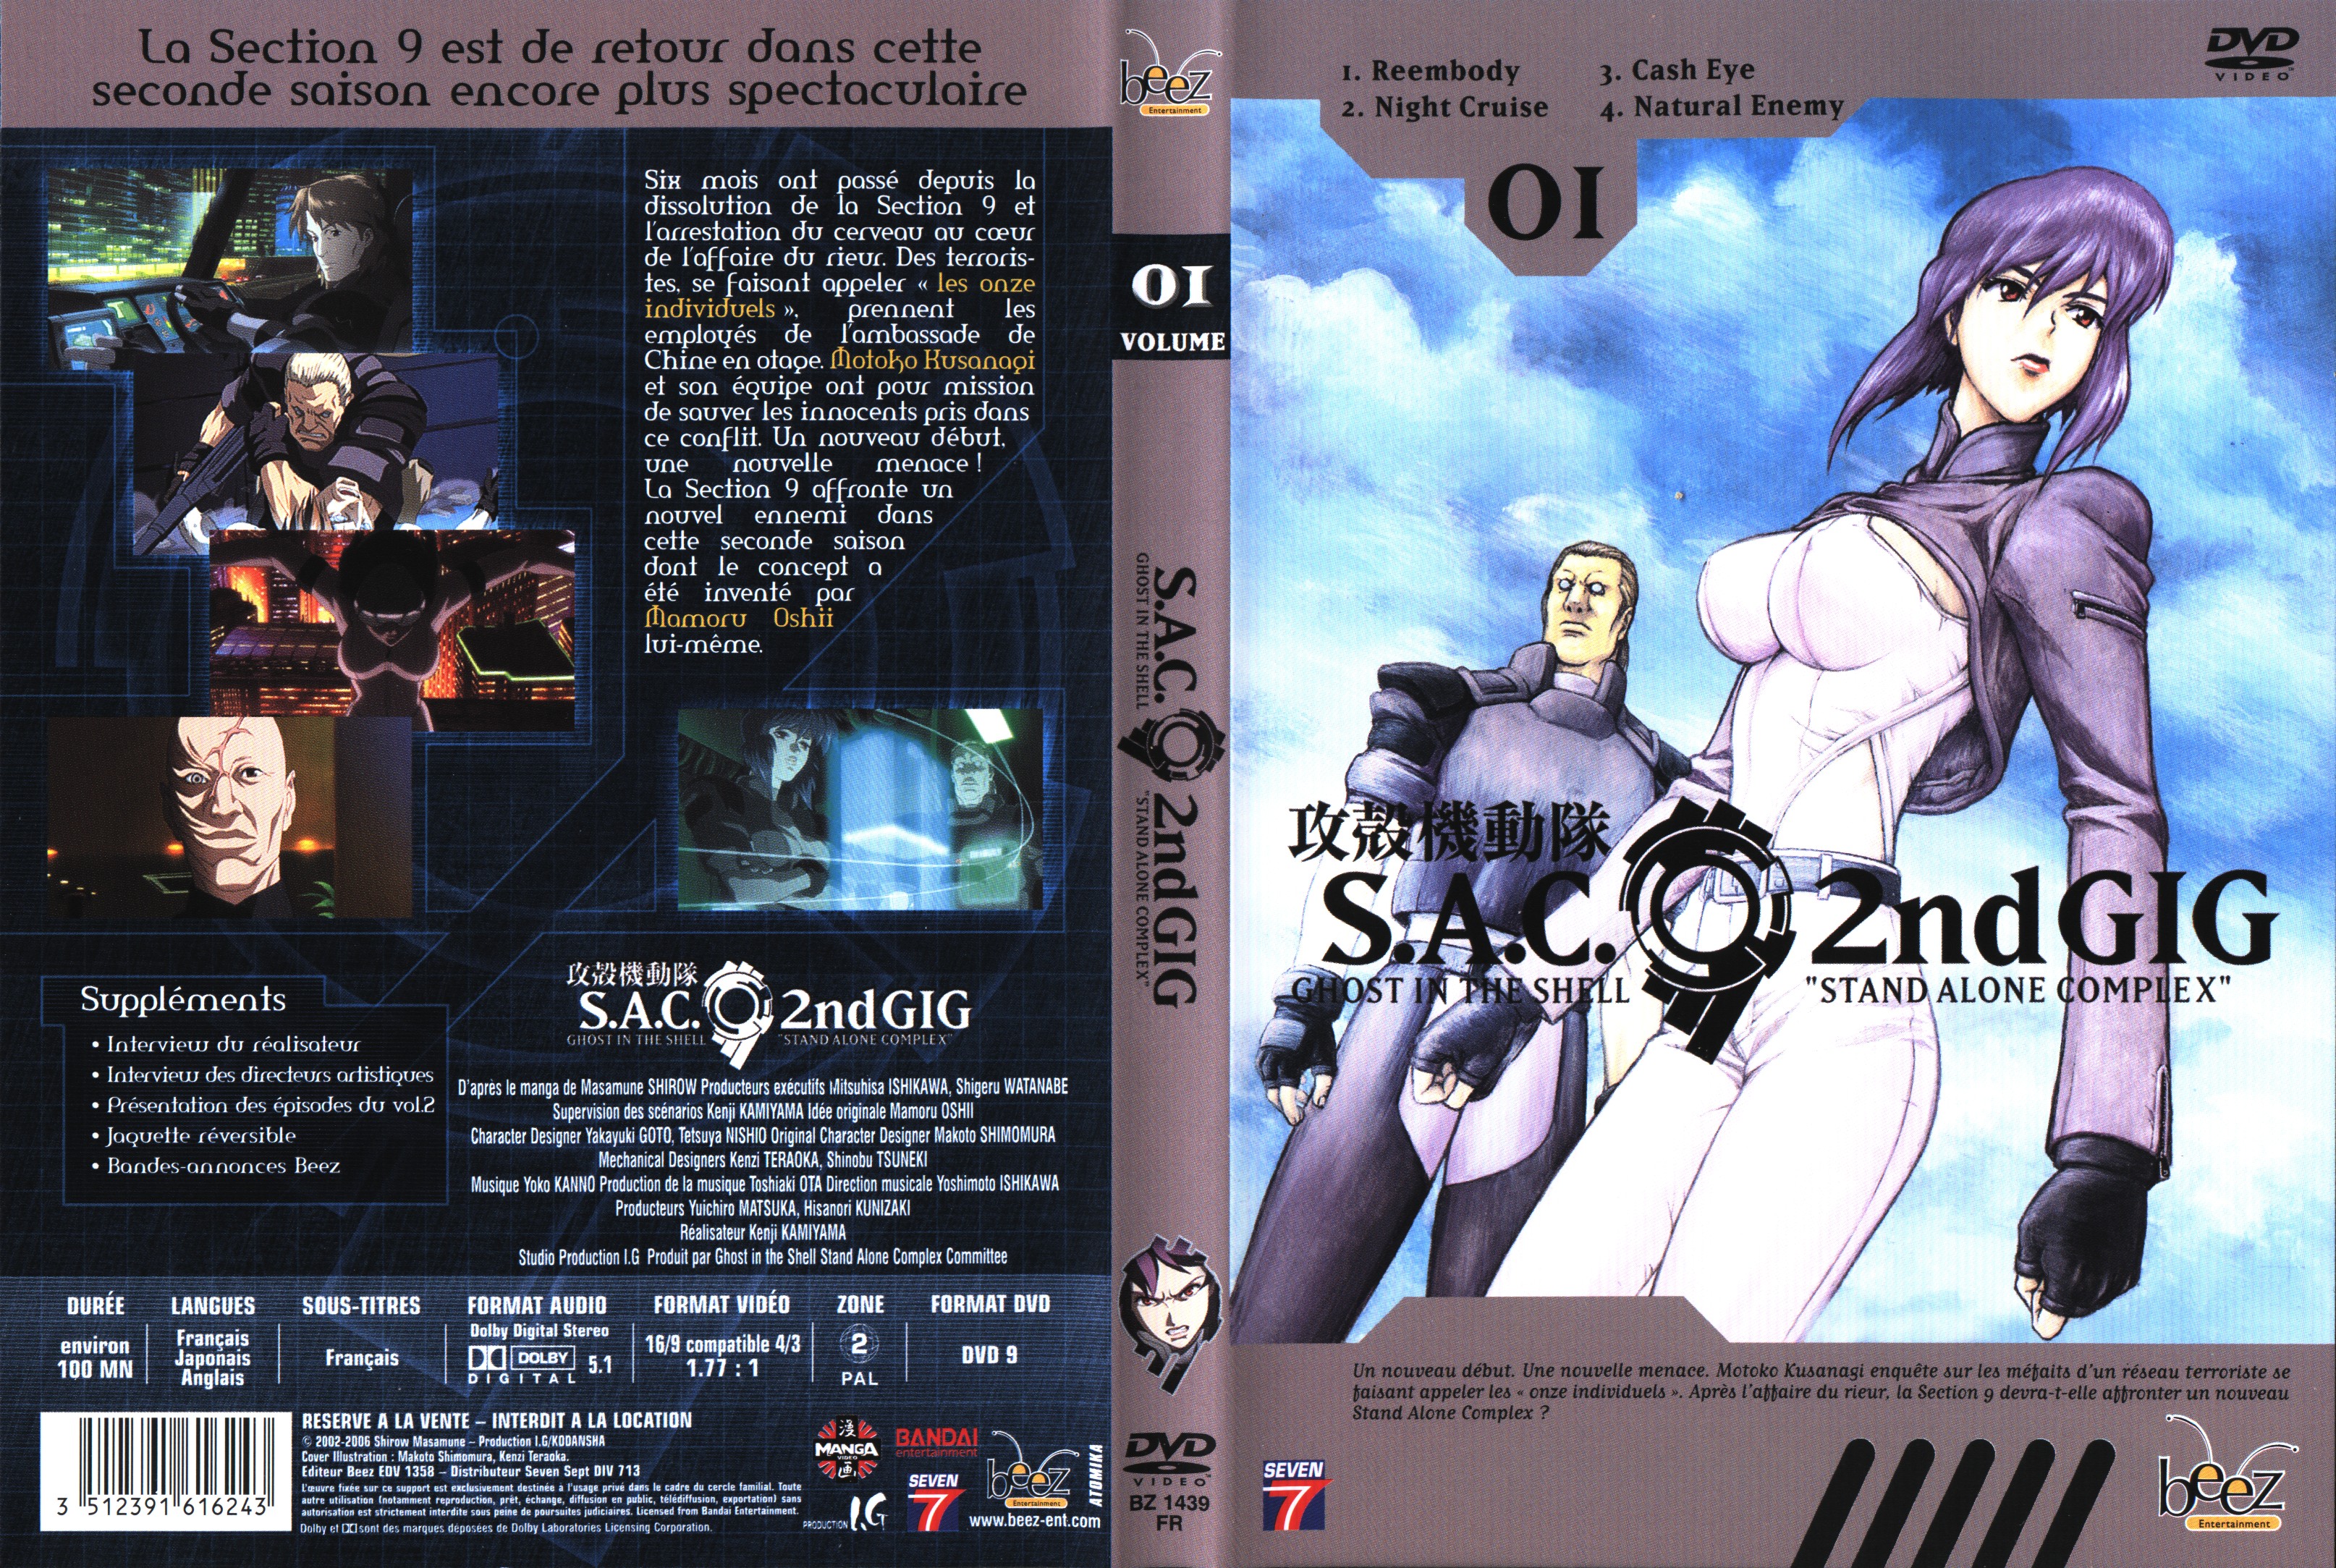 Jaquette DVD Ghost in the shell - stand alone complex 2nd GIG vol 1